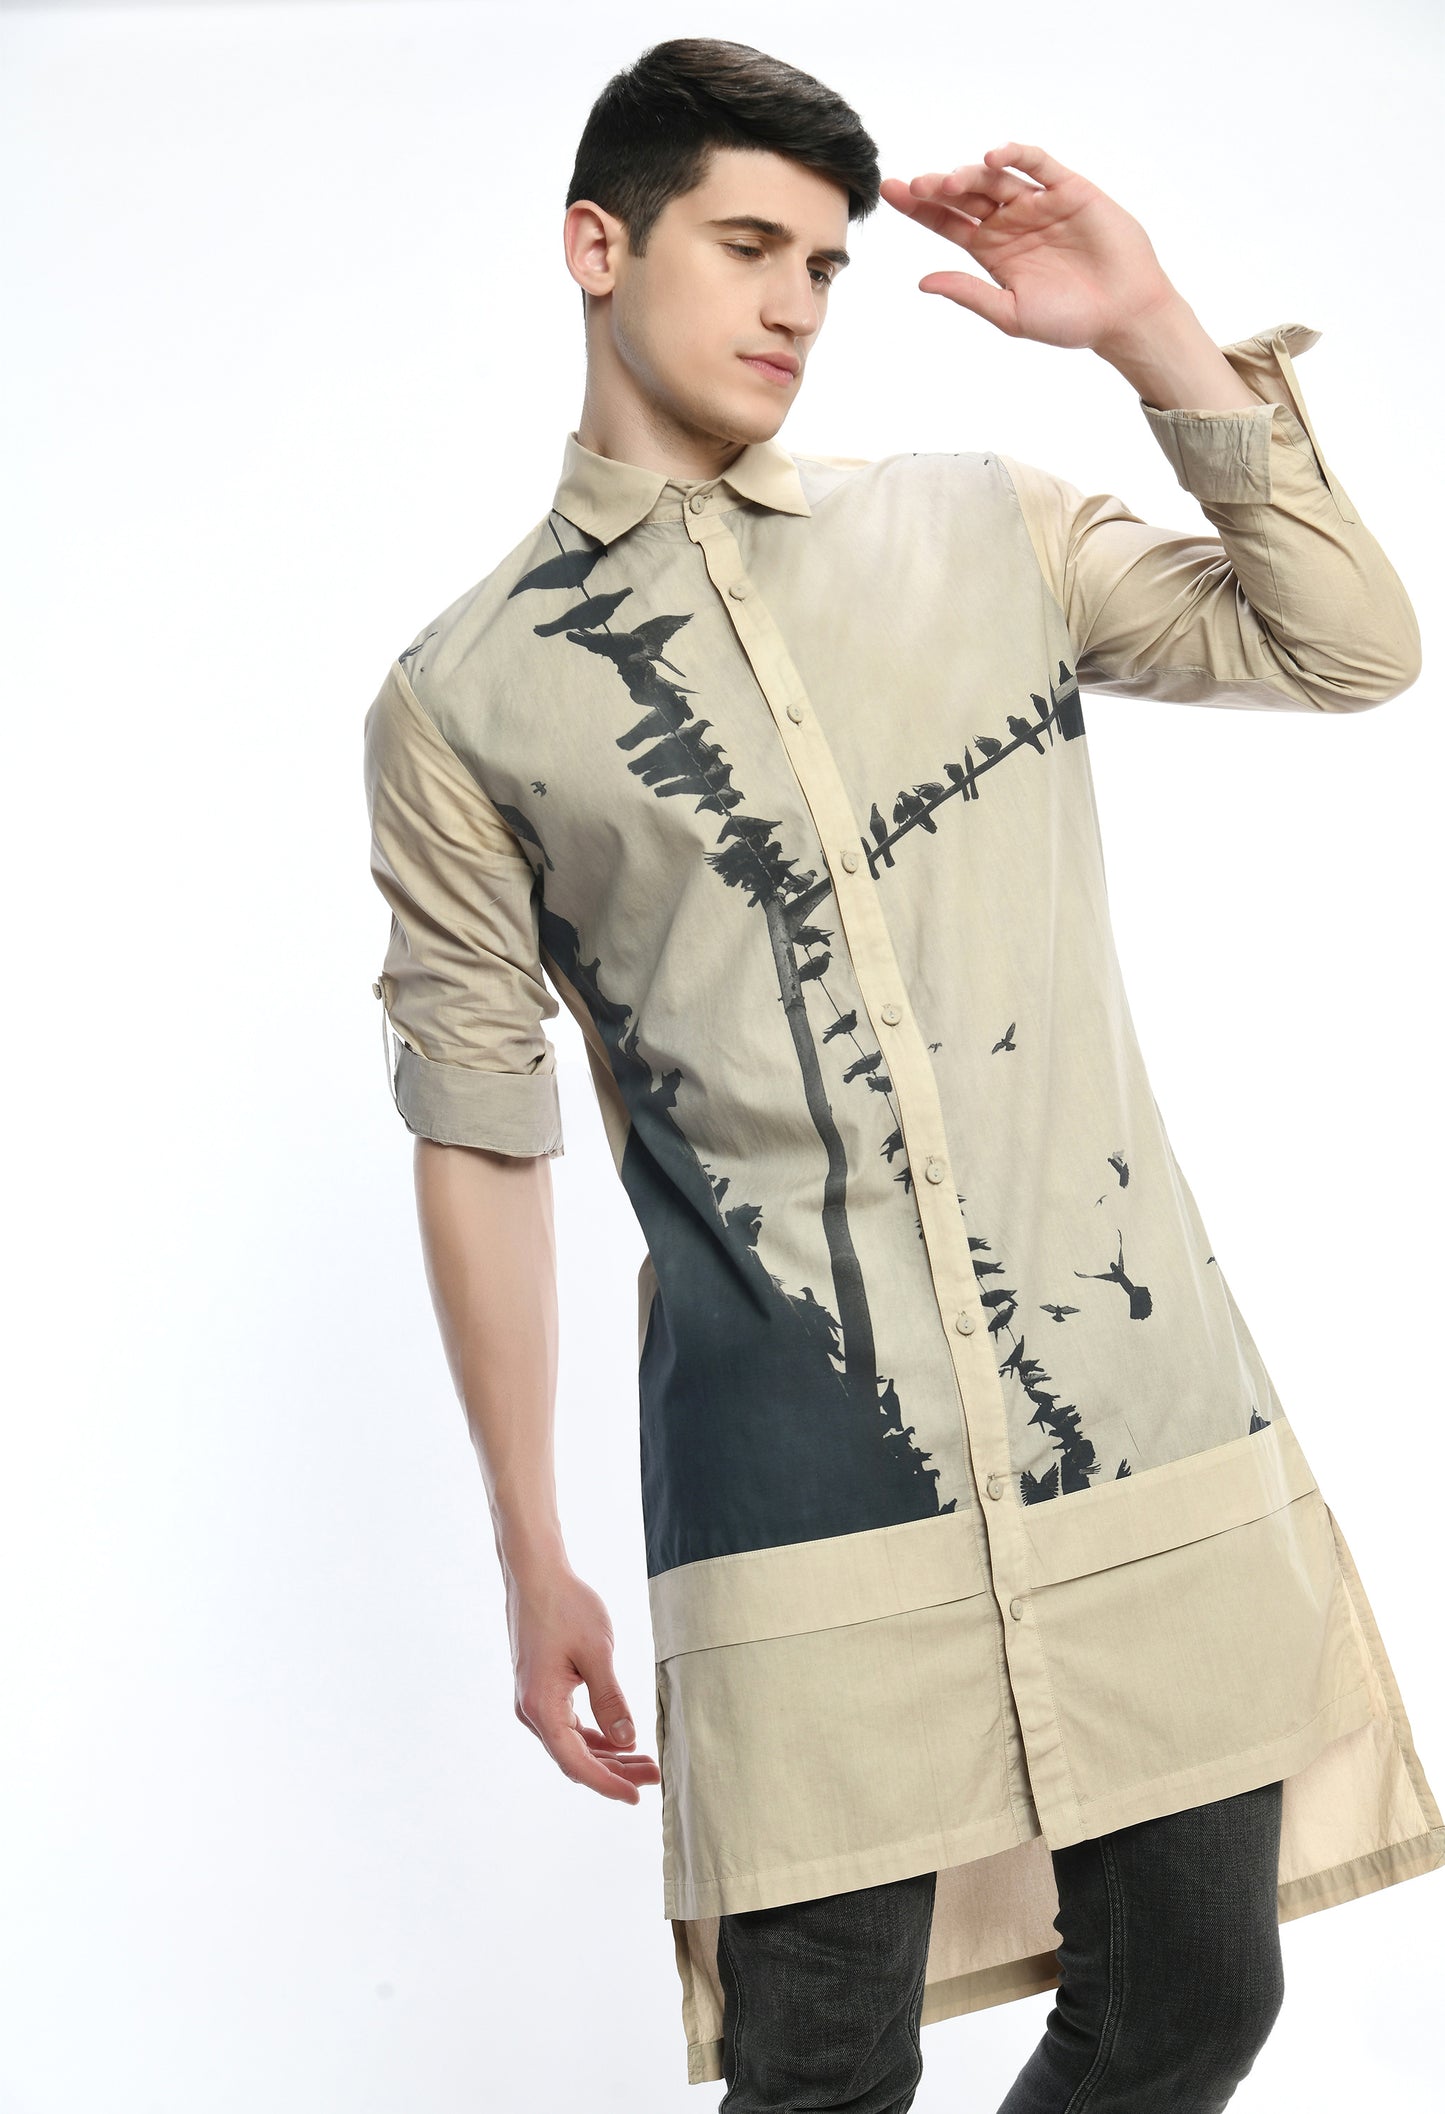 Beige high low, stylish cotton shirt with digital print on it